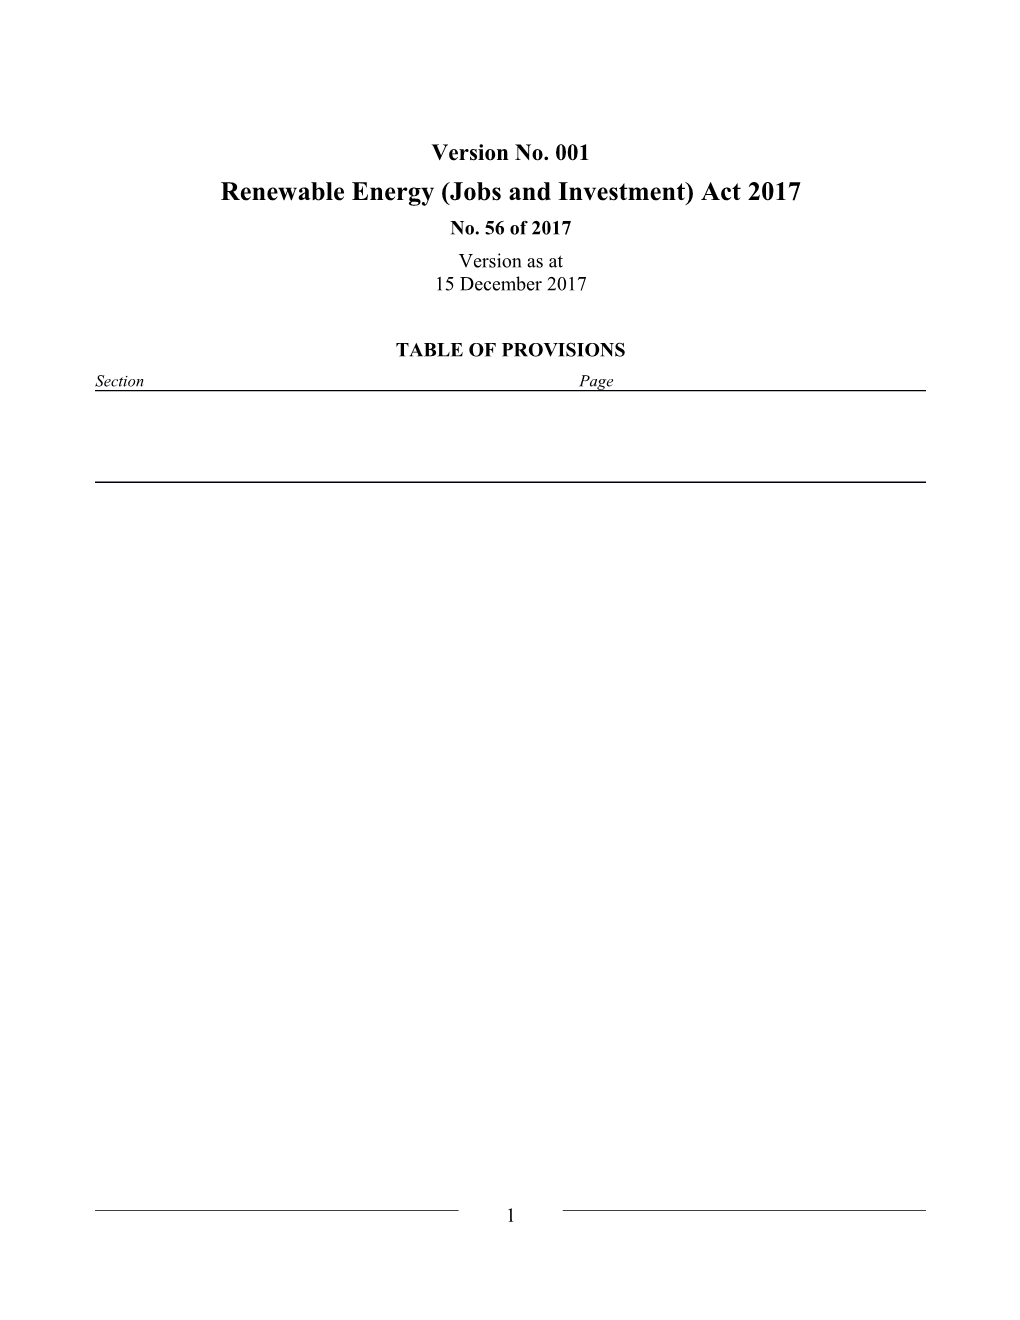 Renewable Energy (Jobs and Investment) Act 2017